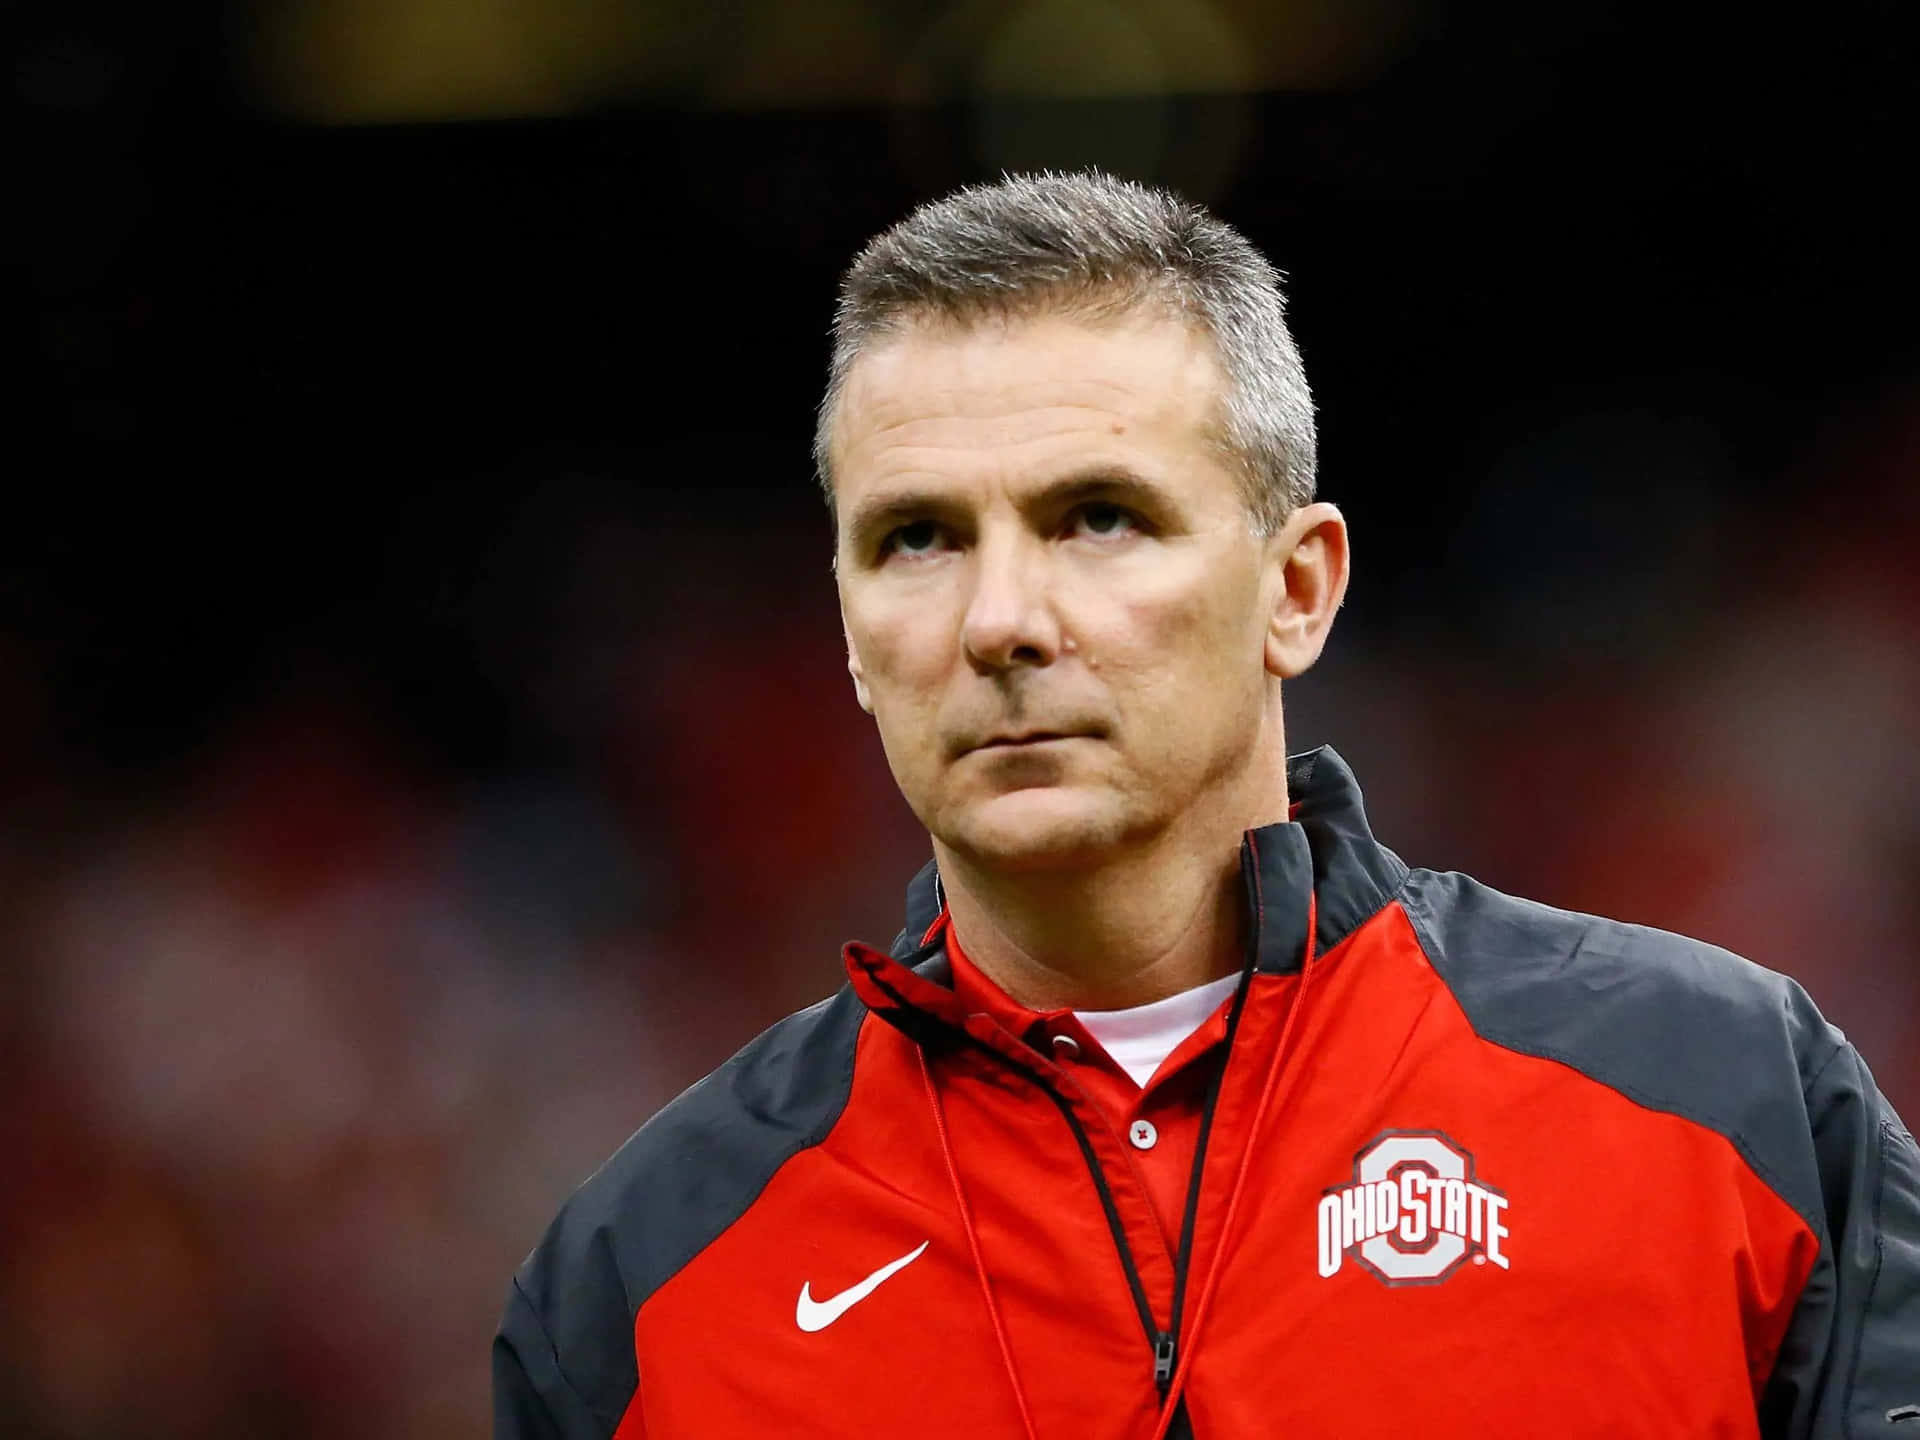 Ohio State Football Coach Mike Mcgillis Looks On During A Game